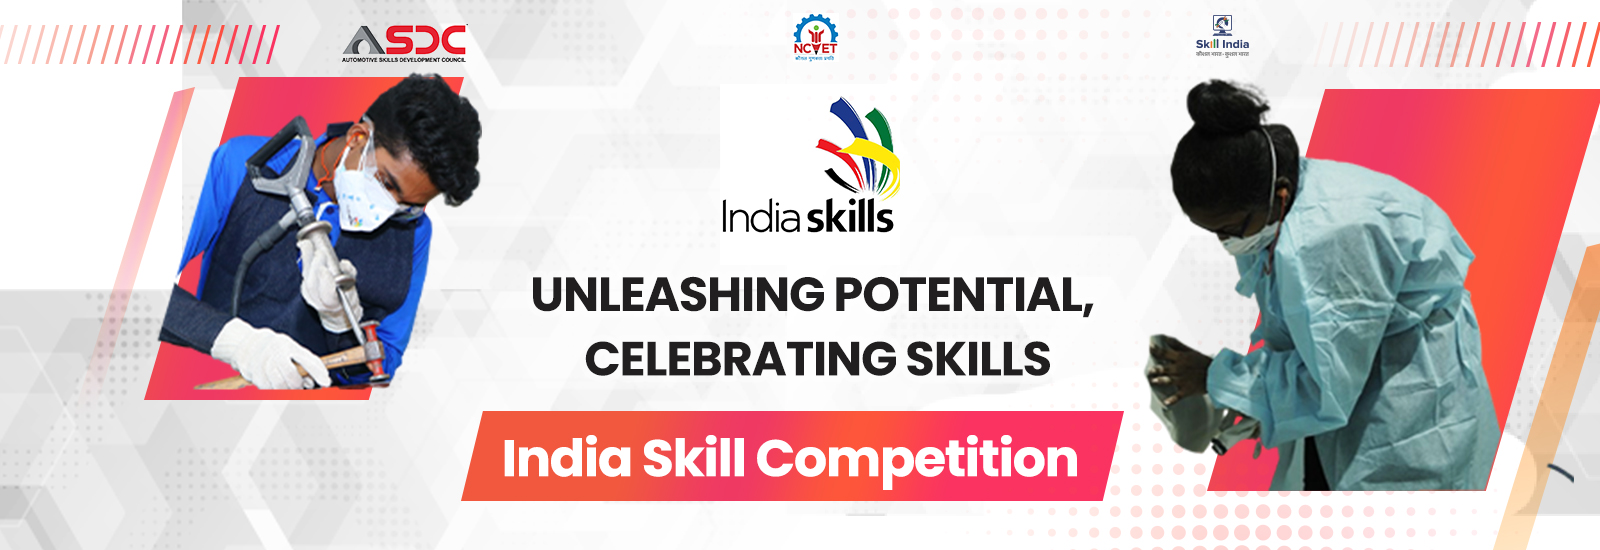 India skill Competition